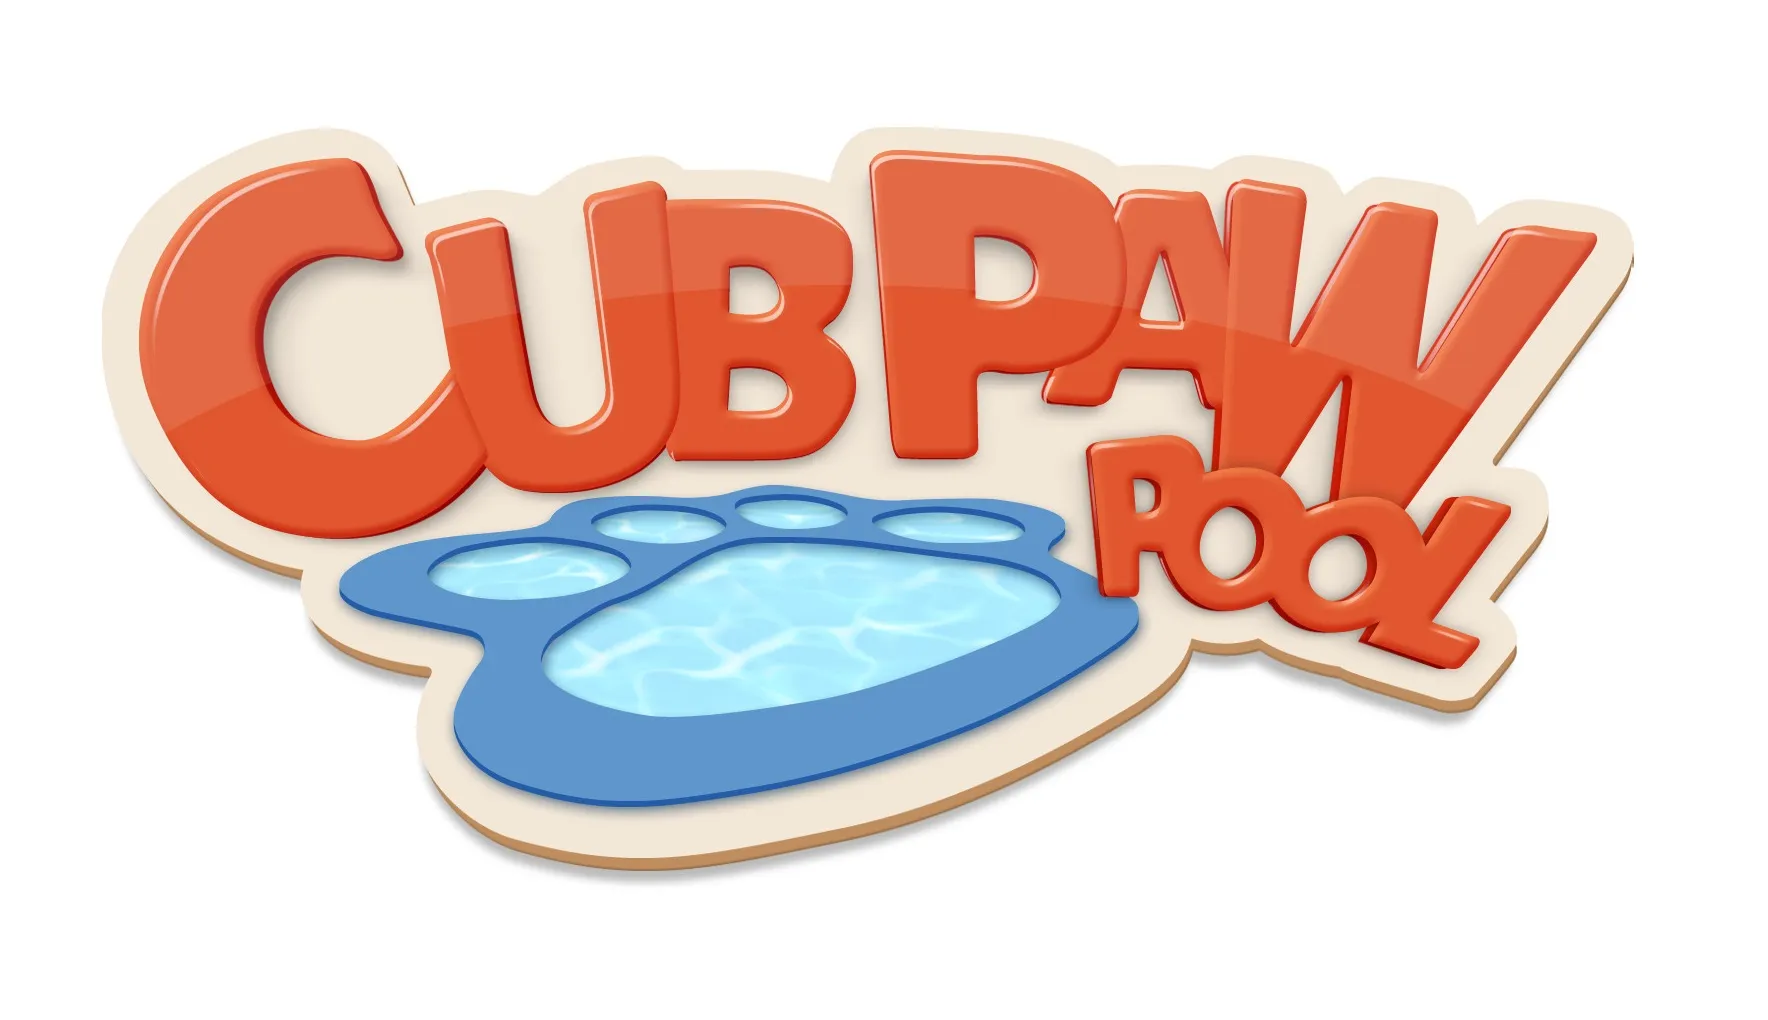 The logo for Cub Paw Pool at Great Wolf Lodge indoor water park and resort.